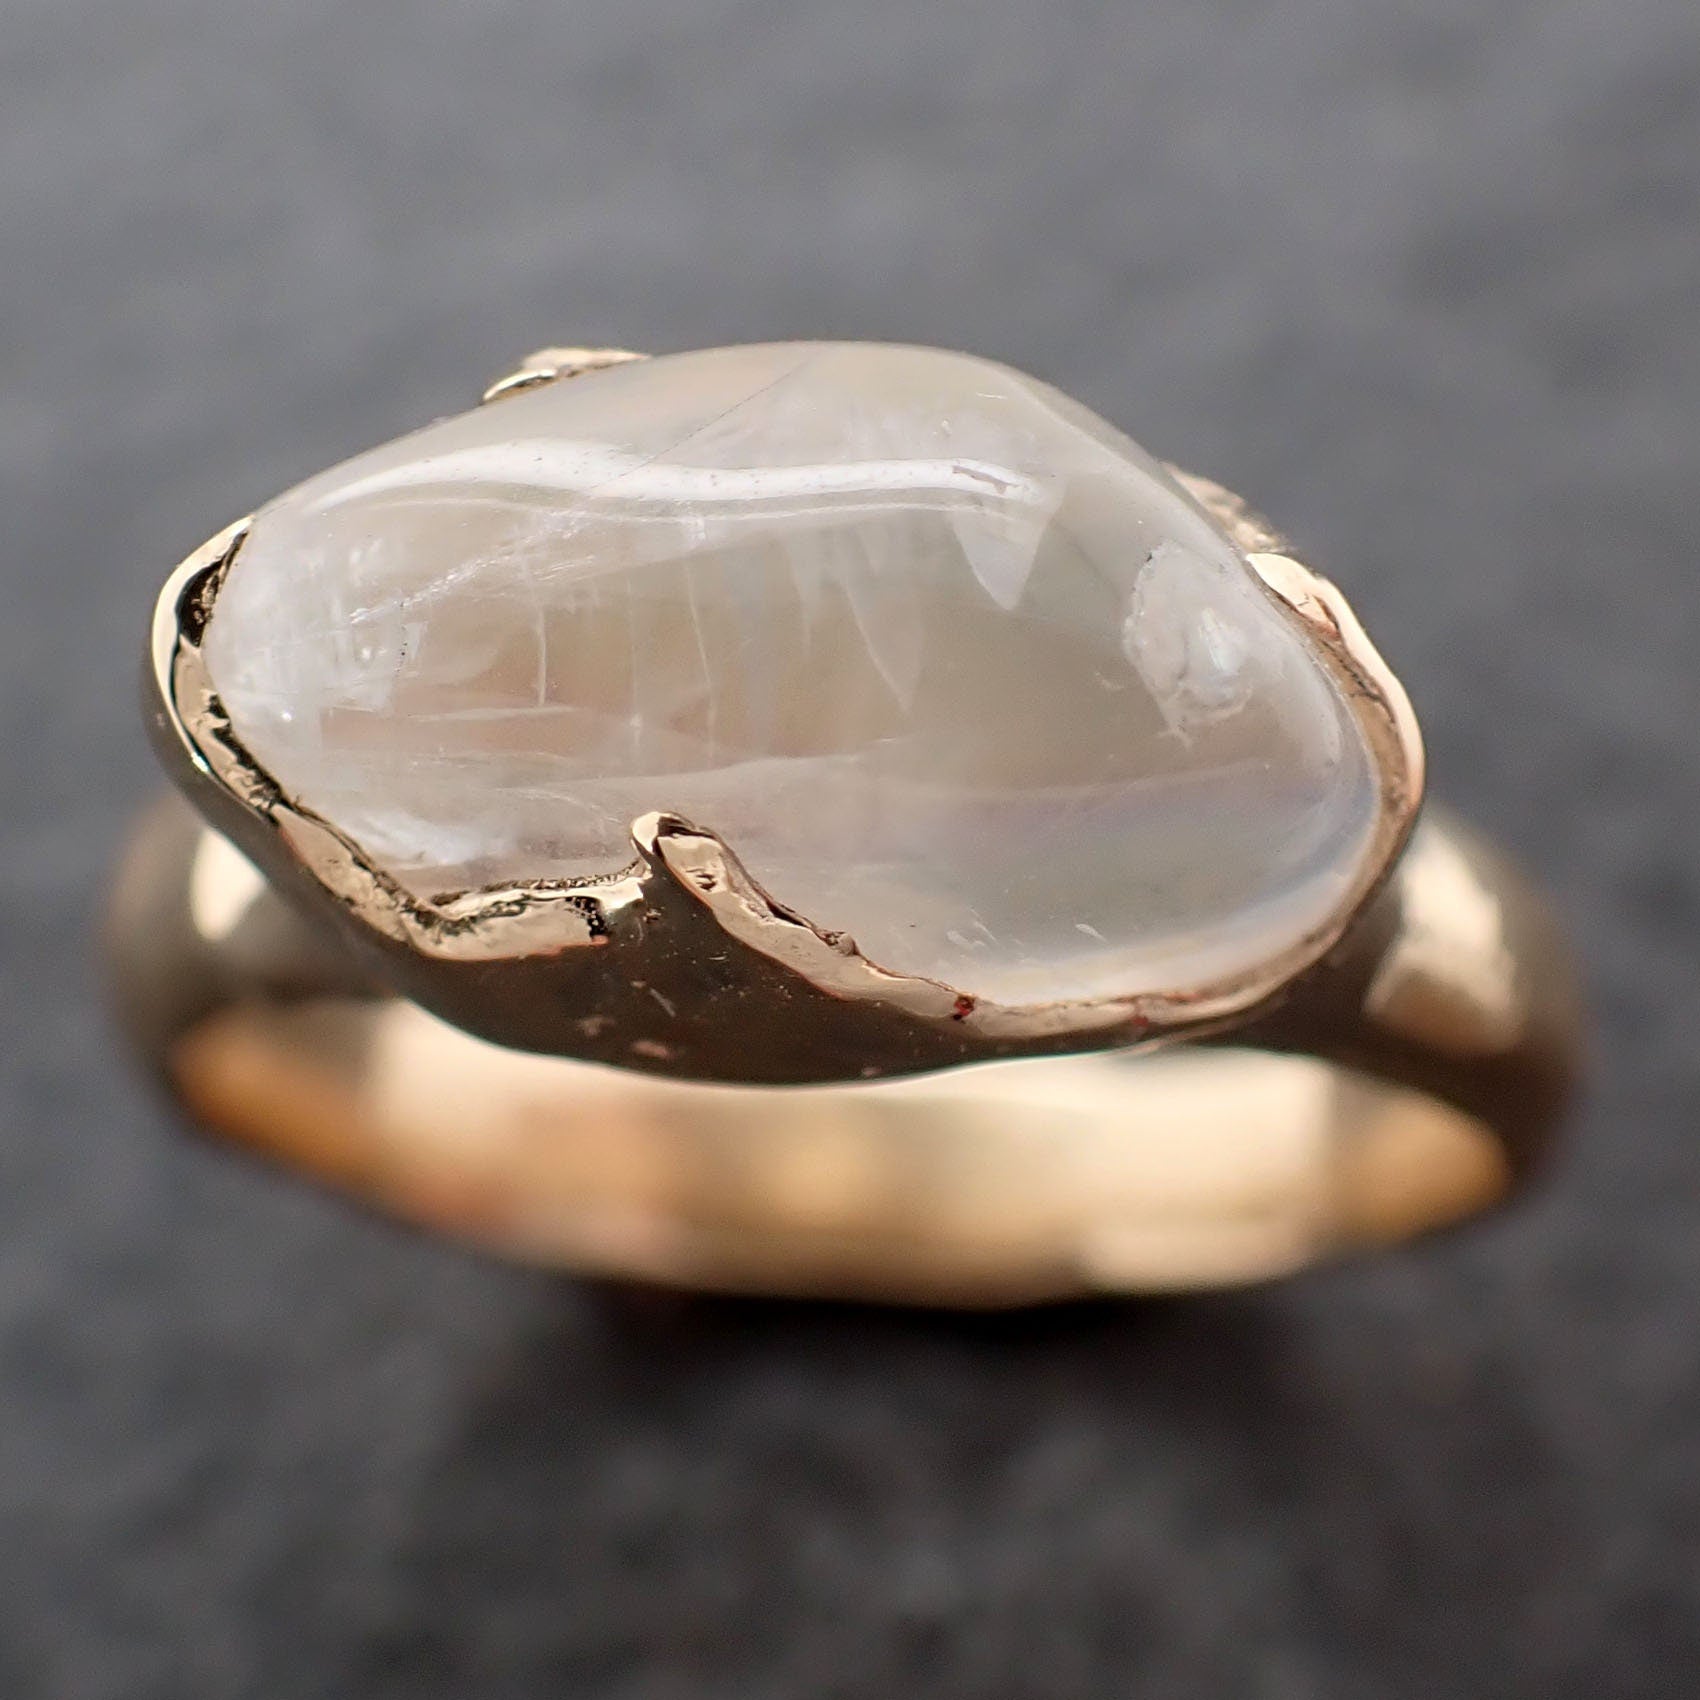 moonstone tumbled 14k gold Solitaire Cocktail Statement gemstone ring 3038